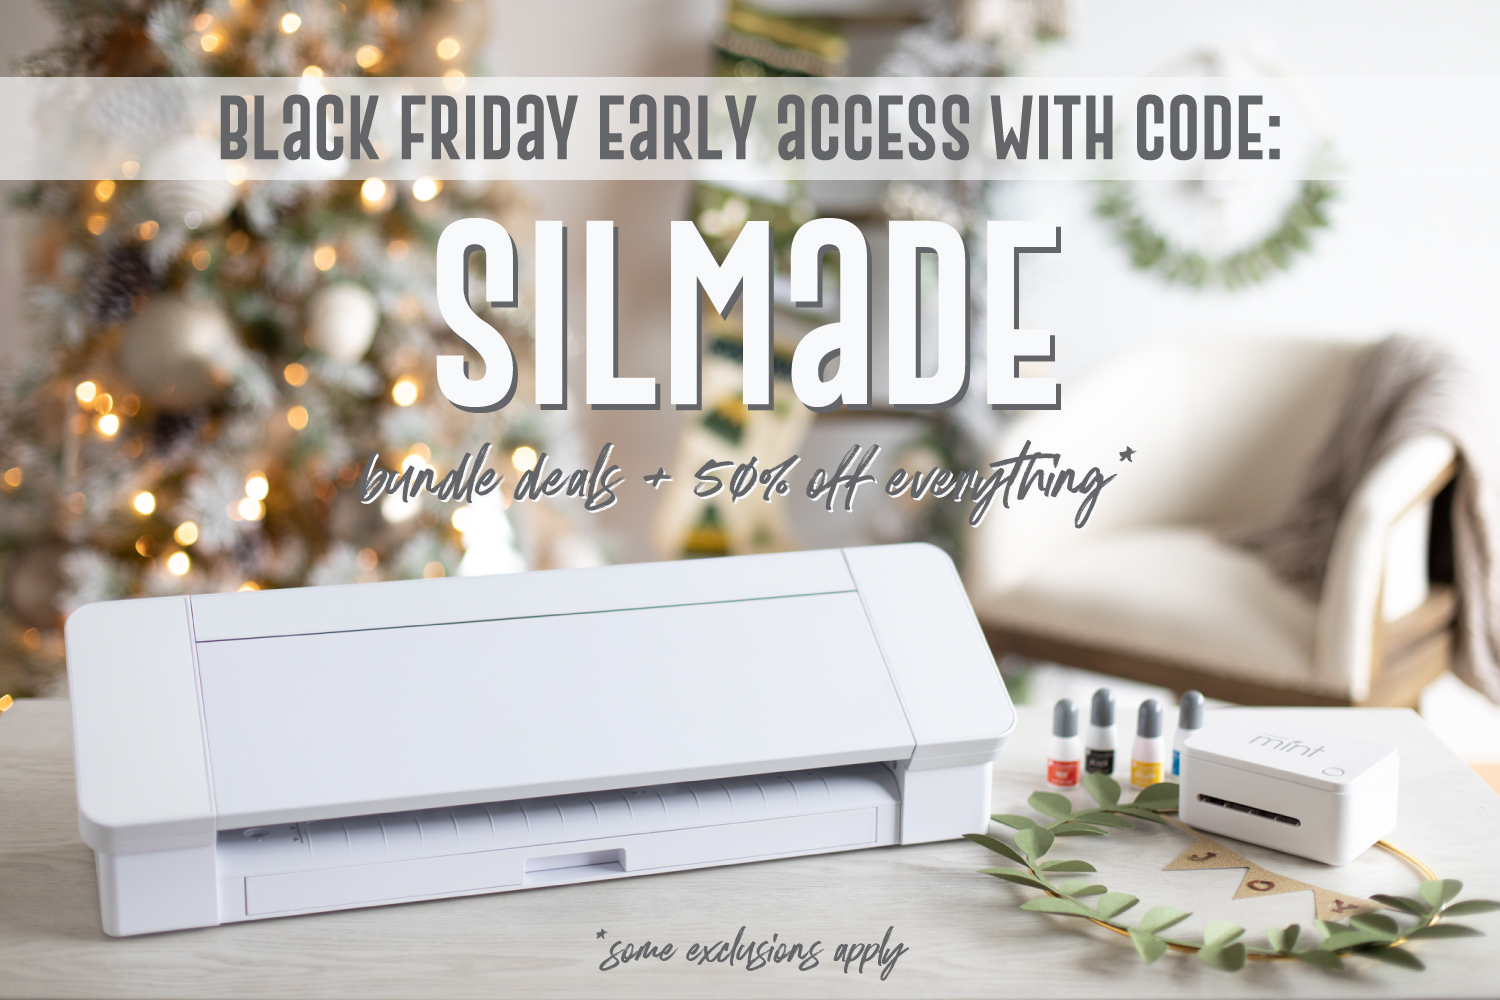 Silhouette Black Friday deals: Up to 25% off Silhouette Portrait 3